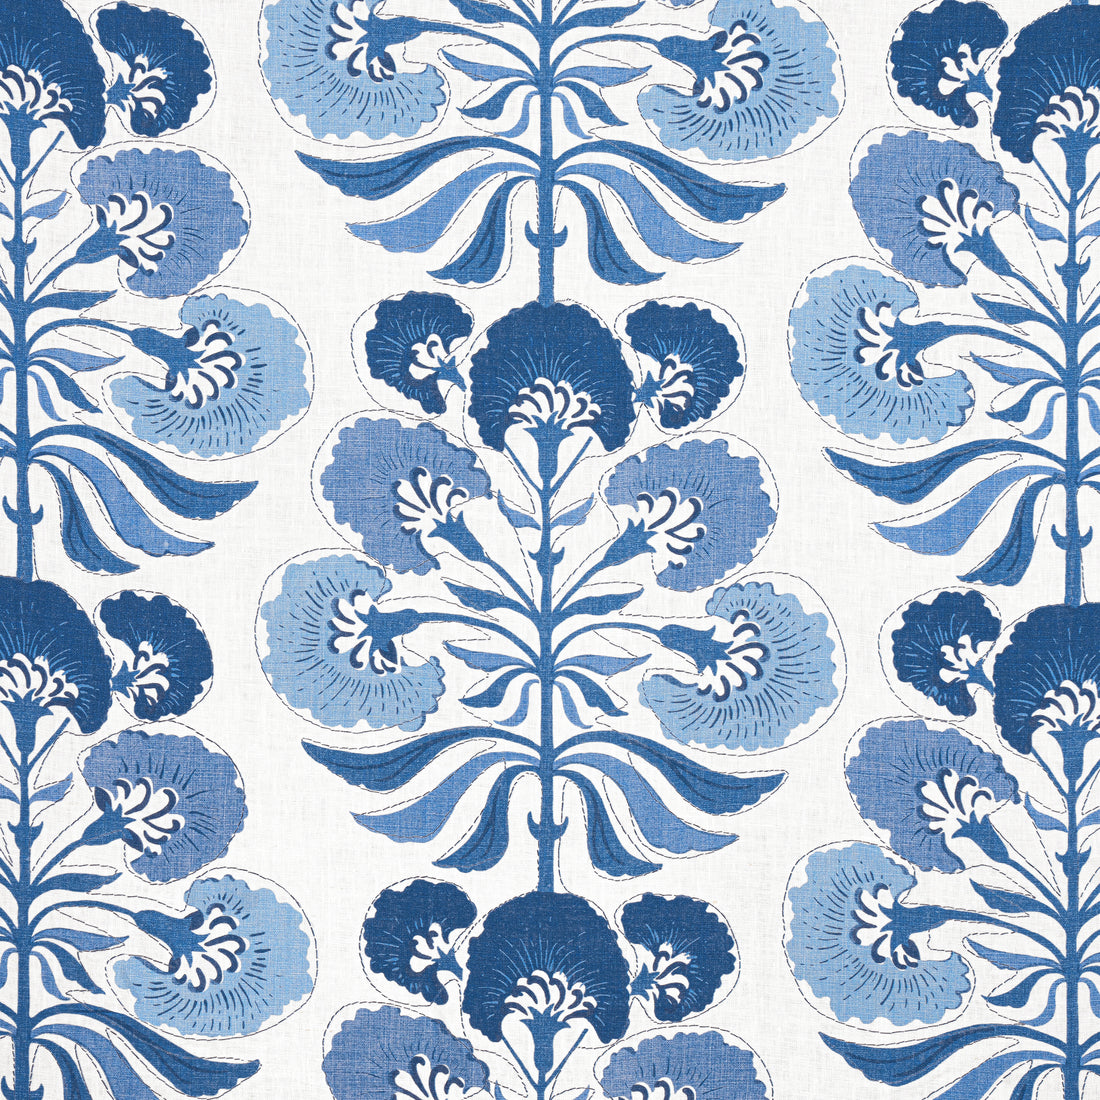 Tybee Tree fabric in blue and white color - pattern number F916217 - by Thibaut in the Kismet collection